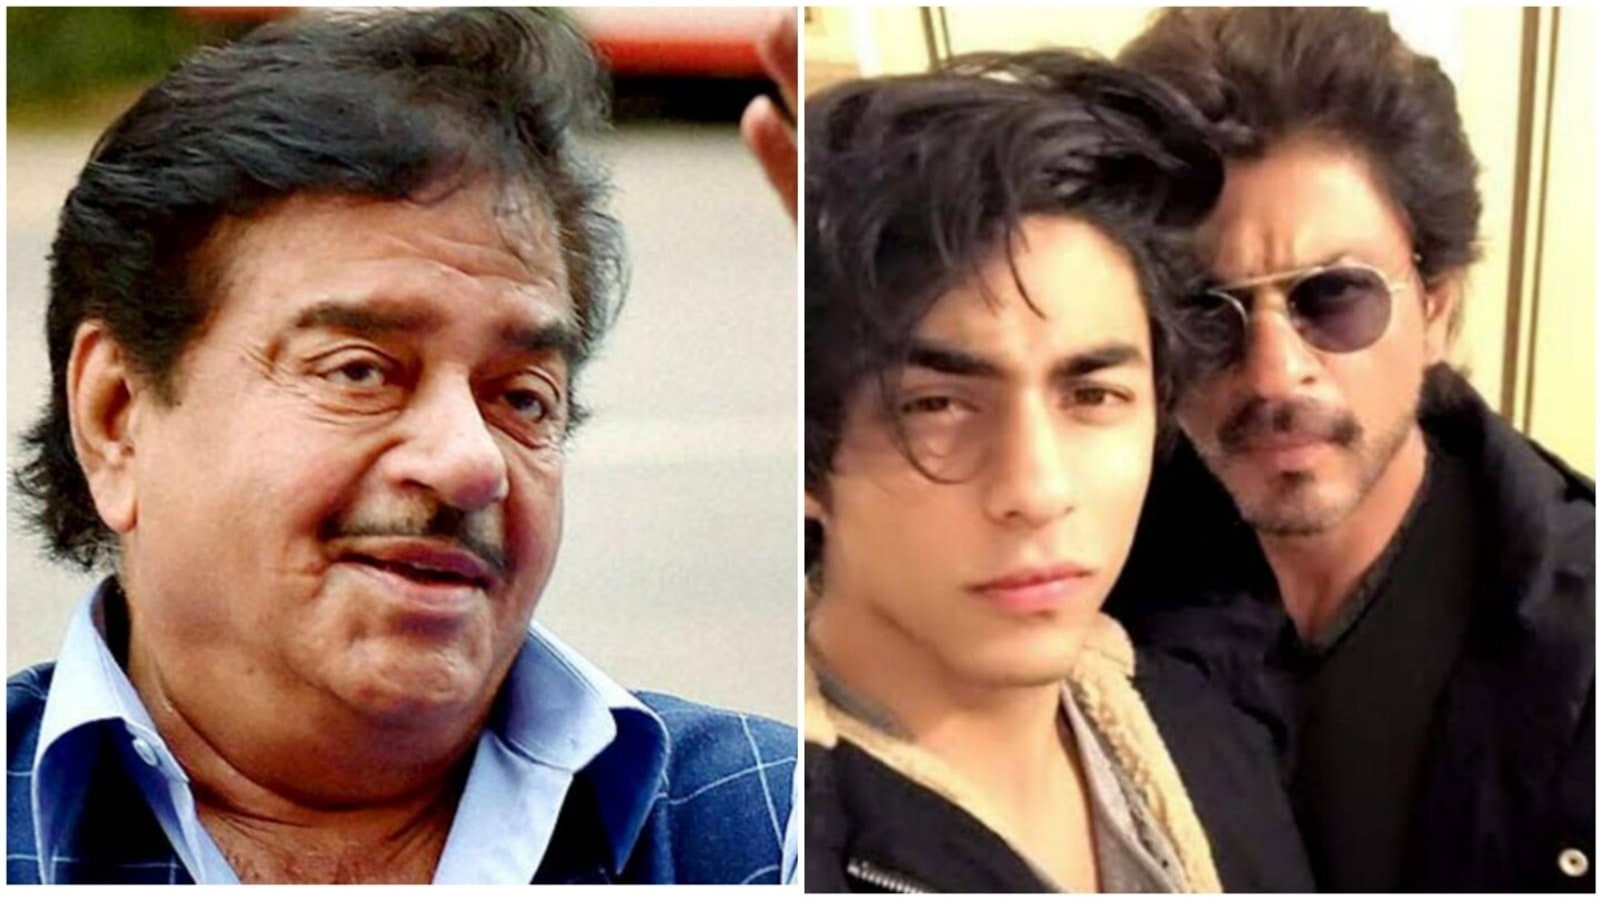 Aryan Khan case: Shatrughan Sinha calls NCB’s clean chit too little, too late: ‘I can understand Shah Rukh Khan’s pain’